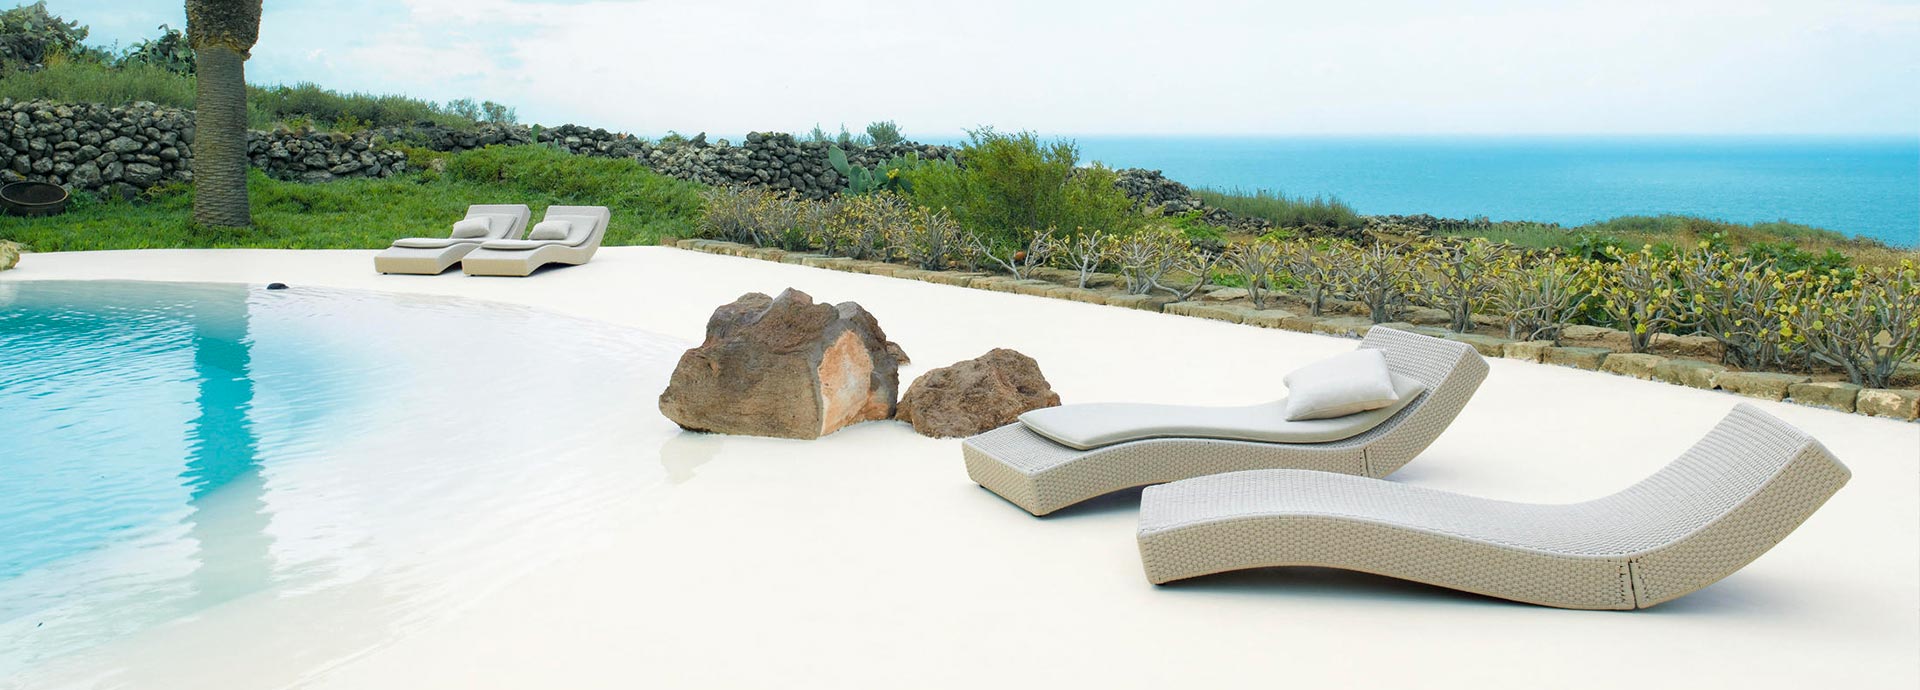 Wave Paola Lenti collection